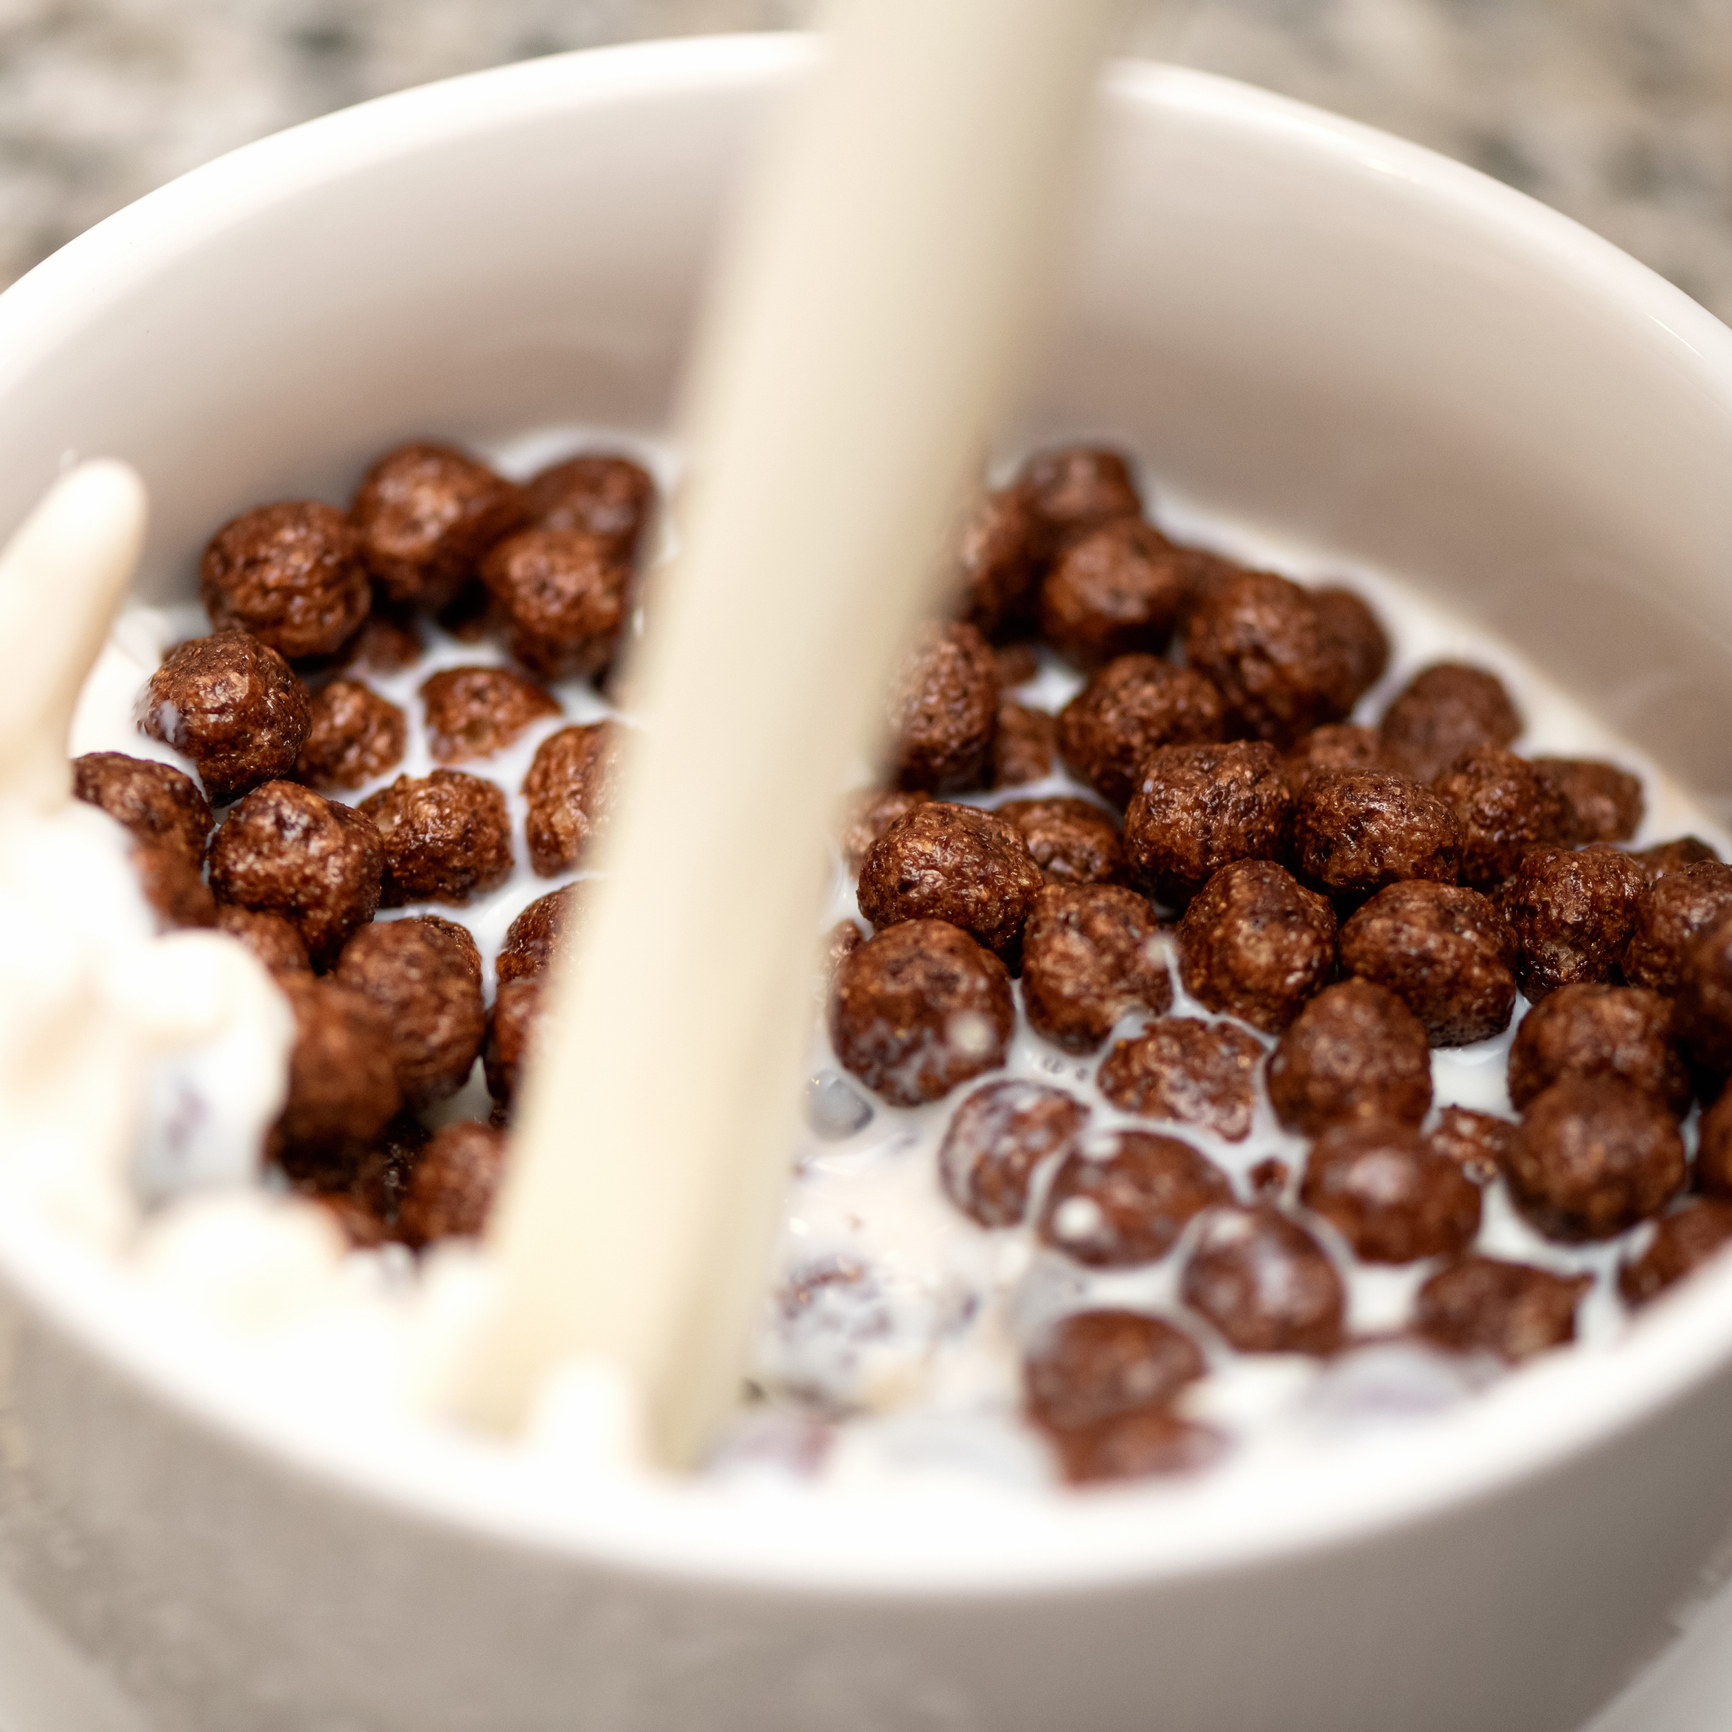 Round chocolate cereal with milk